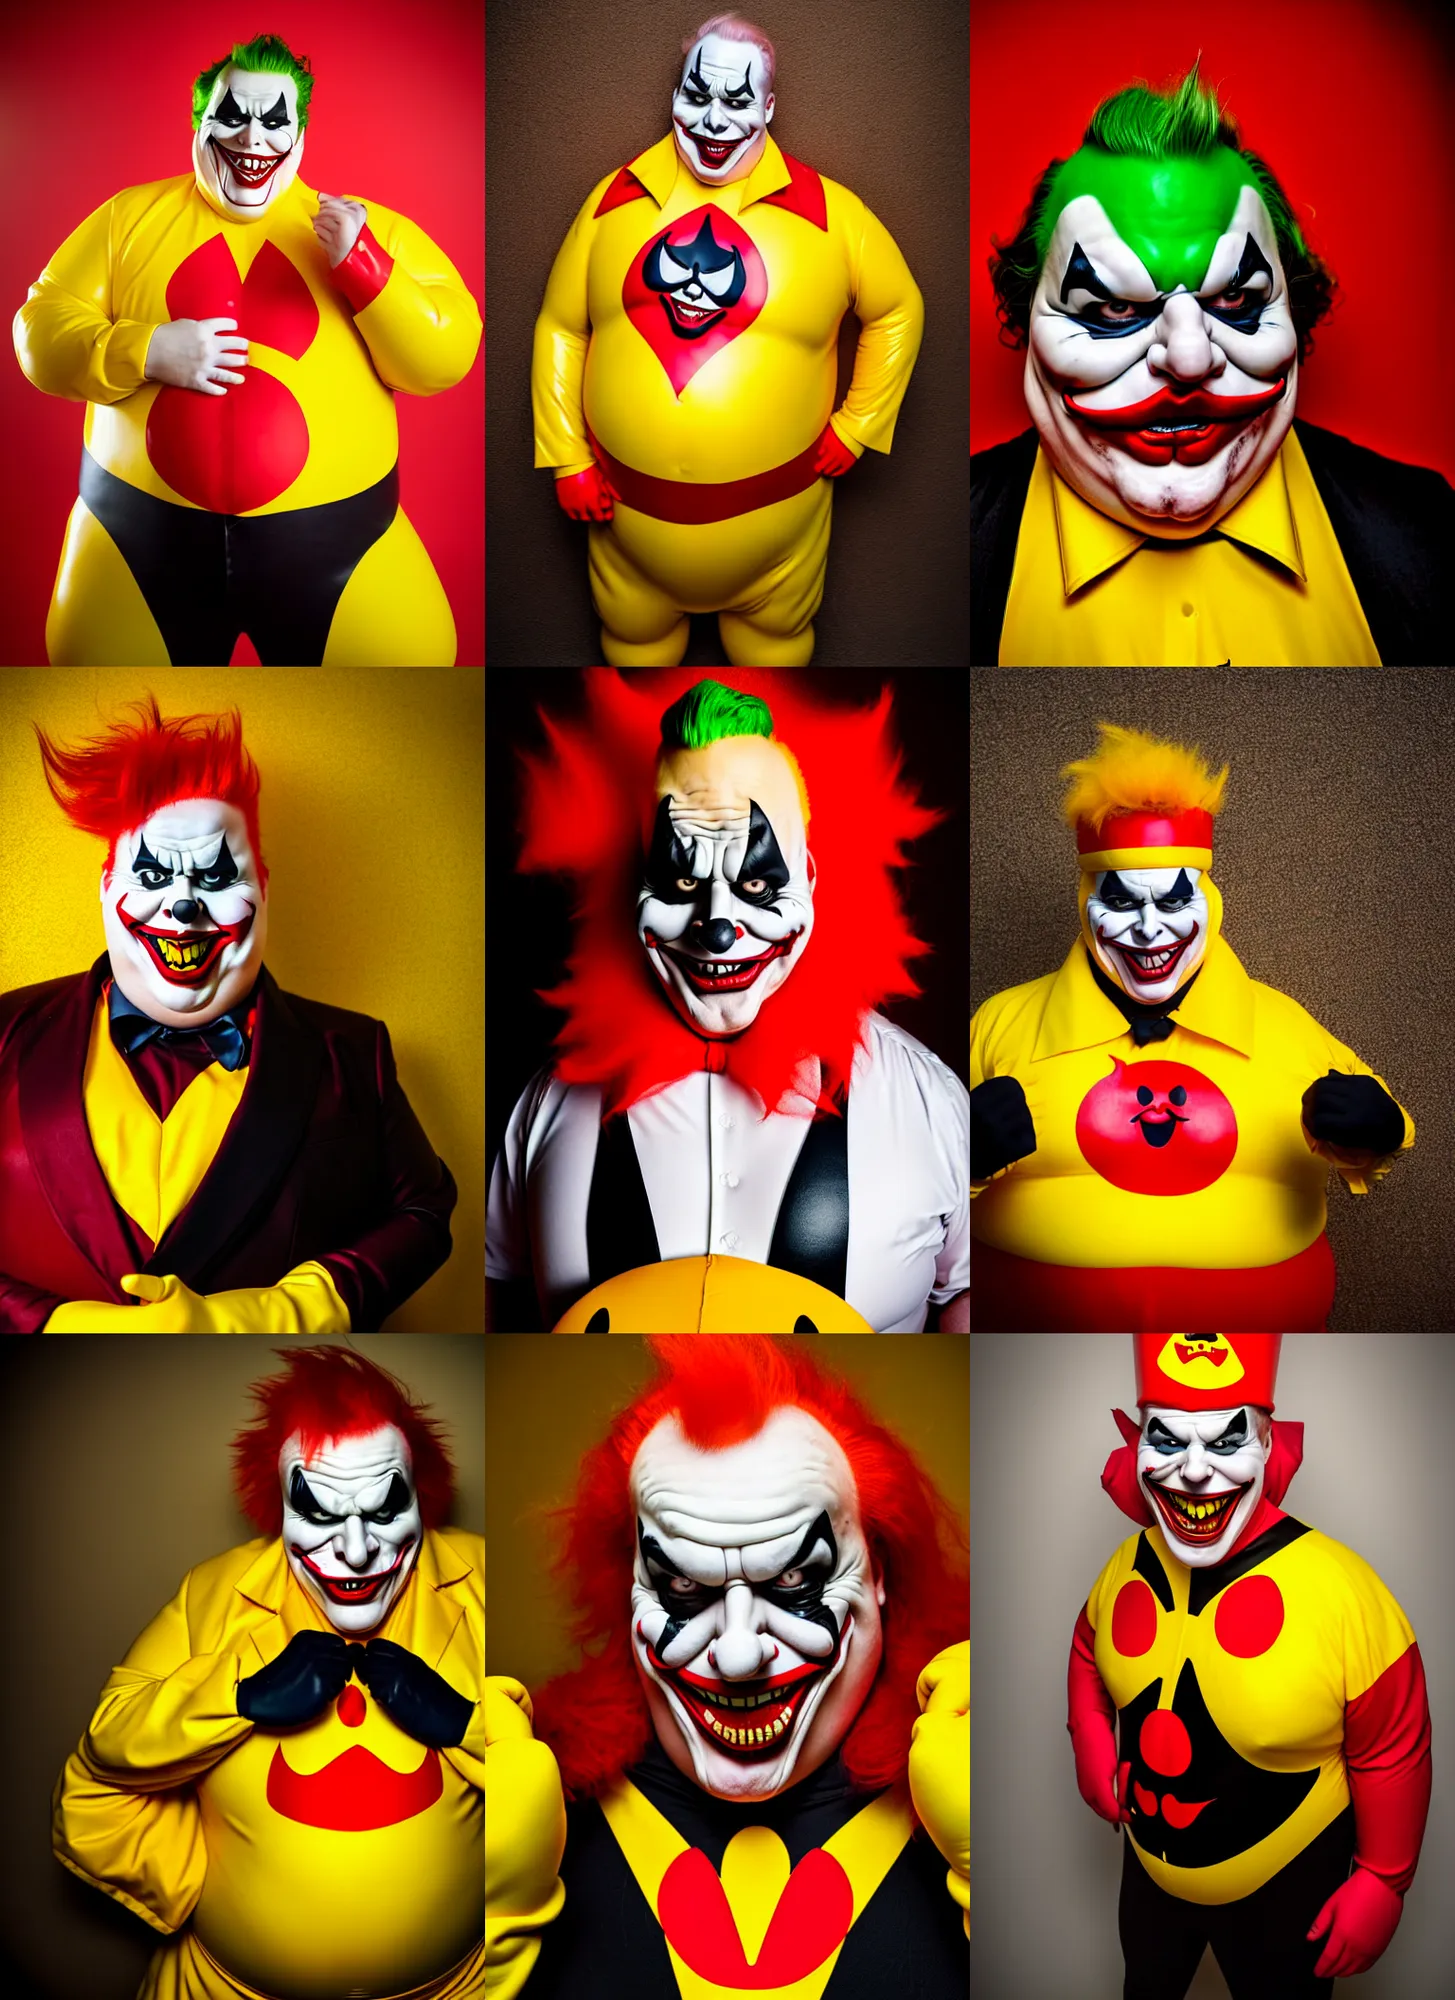 Prompt: wide angle lens portrait of a very fat sinister looking joker dressed in yellow and red rubber latex Ronald Macdonalds costume, red hair, a Macdonalds logo on his chest, photography inspired by Oleg Vdovenko